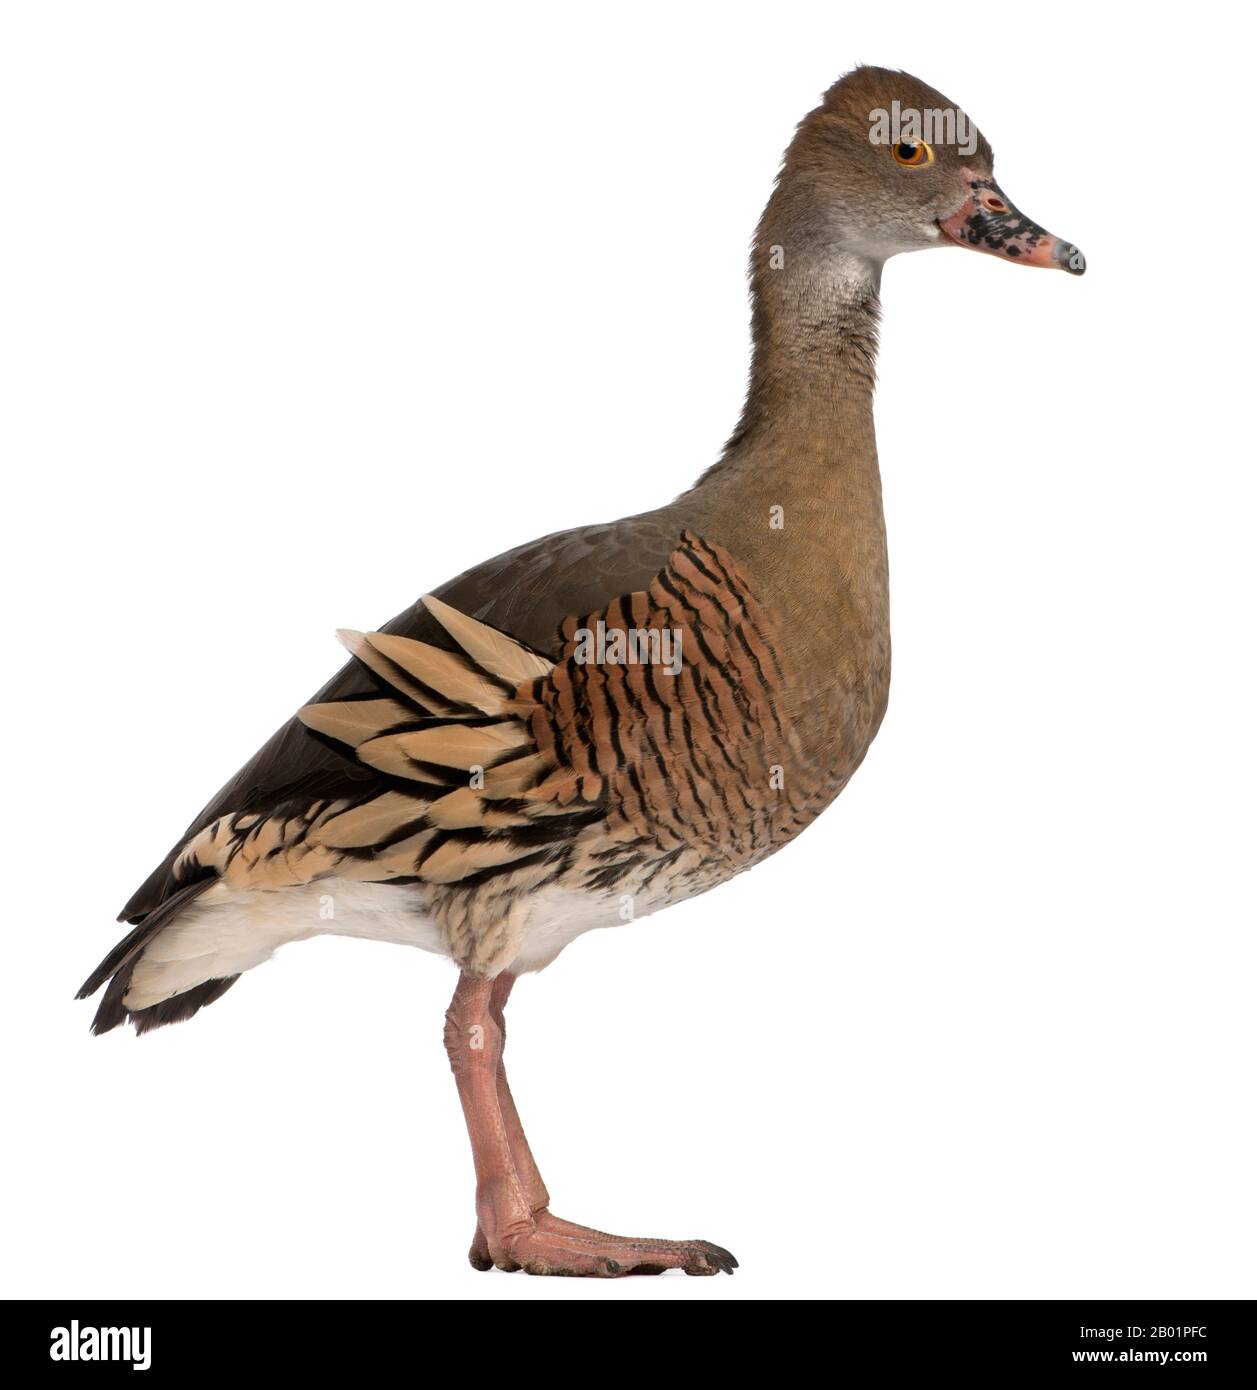 Fulvous Whistling Duck, Dendrocygna bicolor, in front of white background Stock Photo